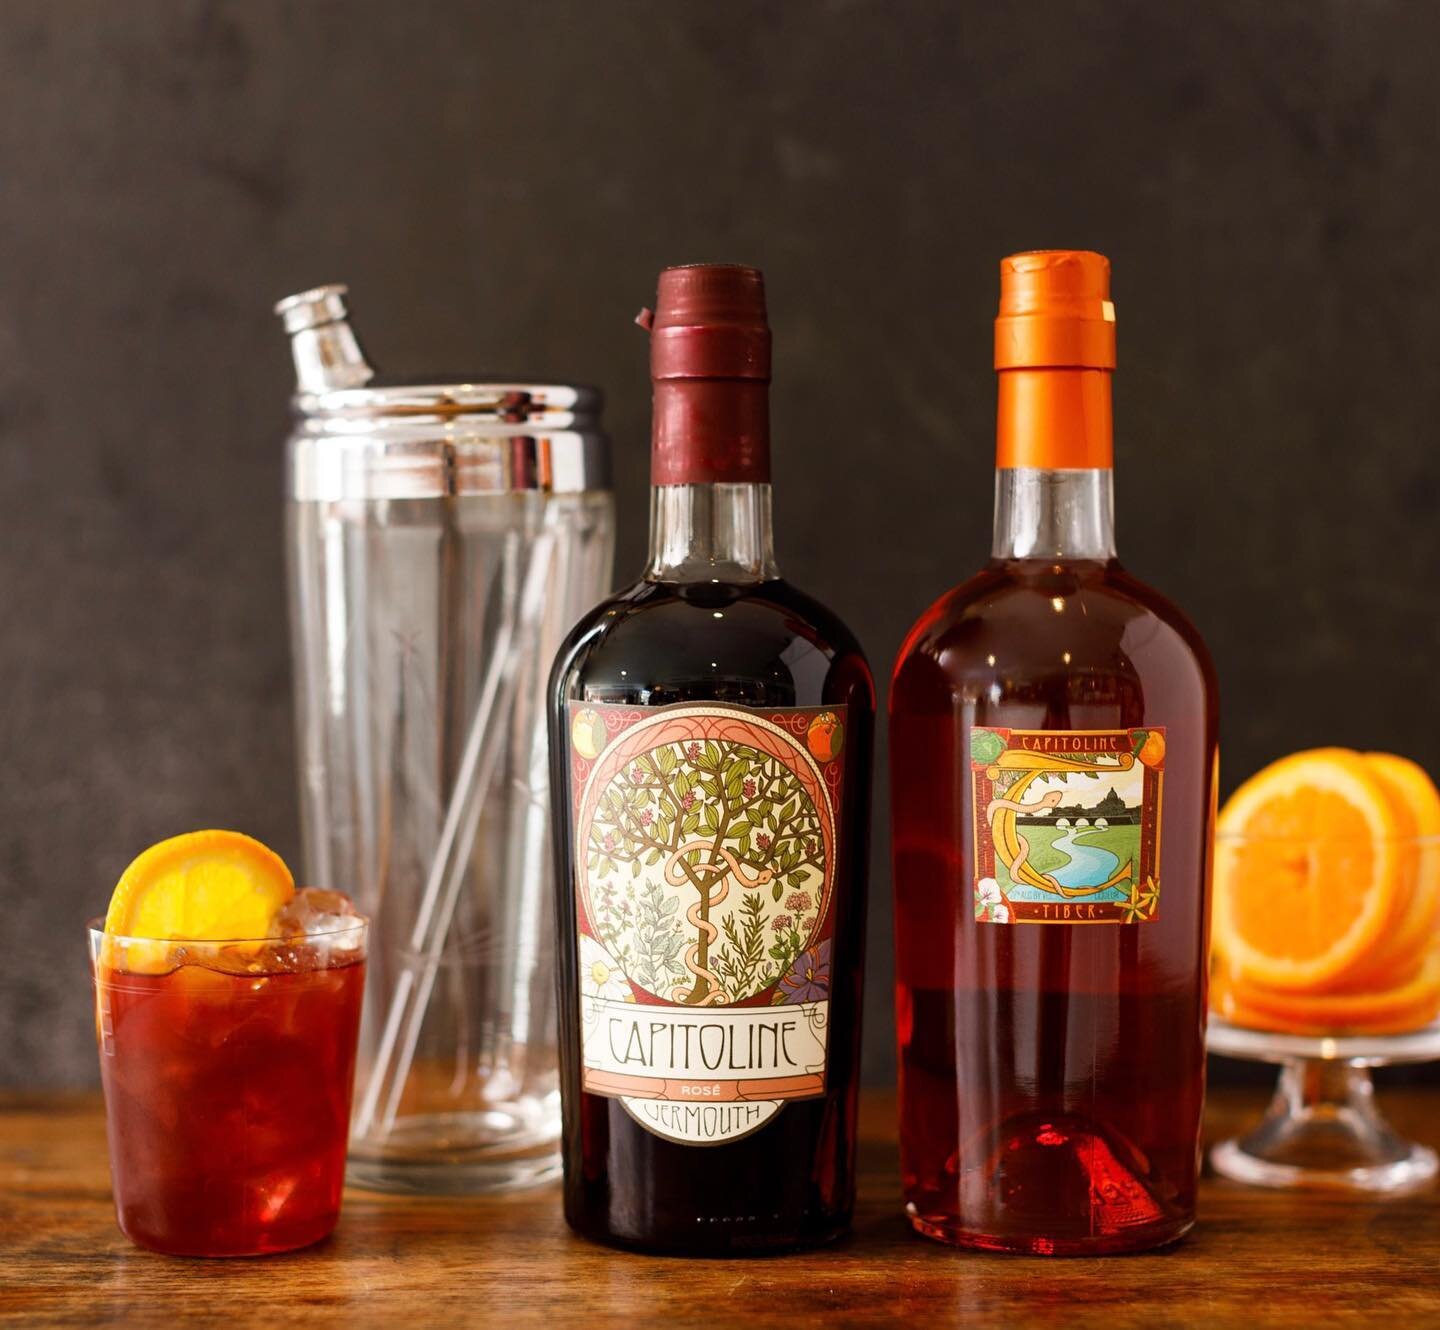 Negroni Sbagliato? With Prosecco in it? You don&rsquo;t say&hellip;
1.25 oz Capitoline Tiber Aperitivo 
1.25 oz Capitoline Ros&eacute; vermouth
Pour over ice, top with #prosecco and garnish with an orange slice. 
#stunning